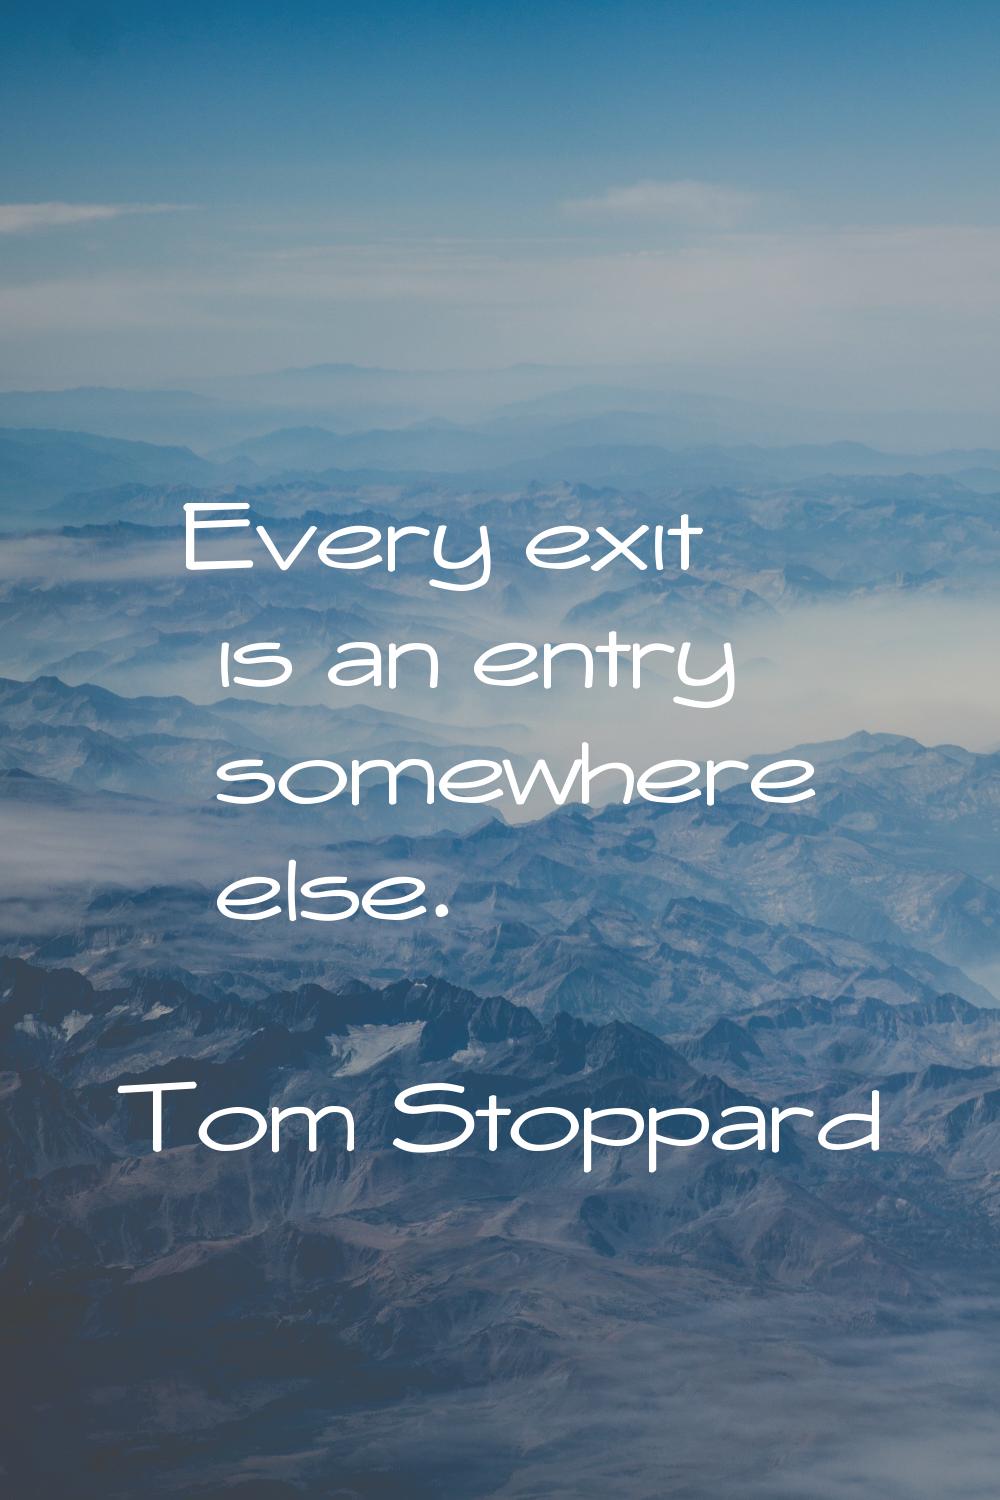 Every exit is an entry somewhere else.